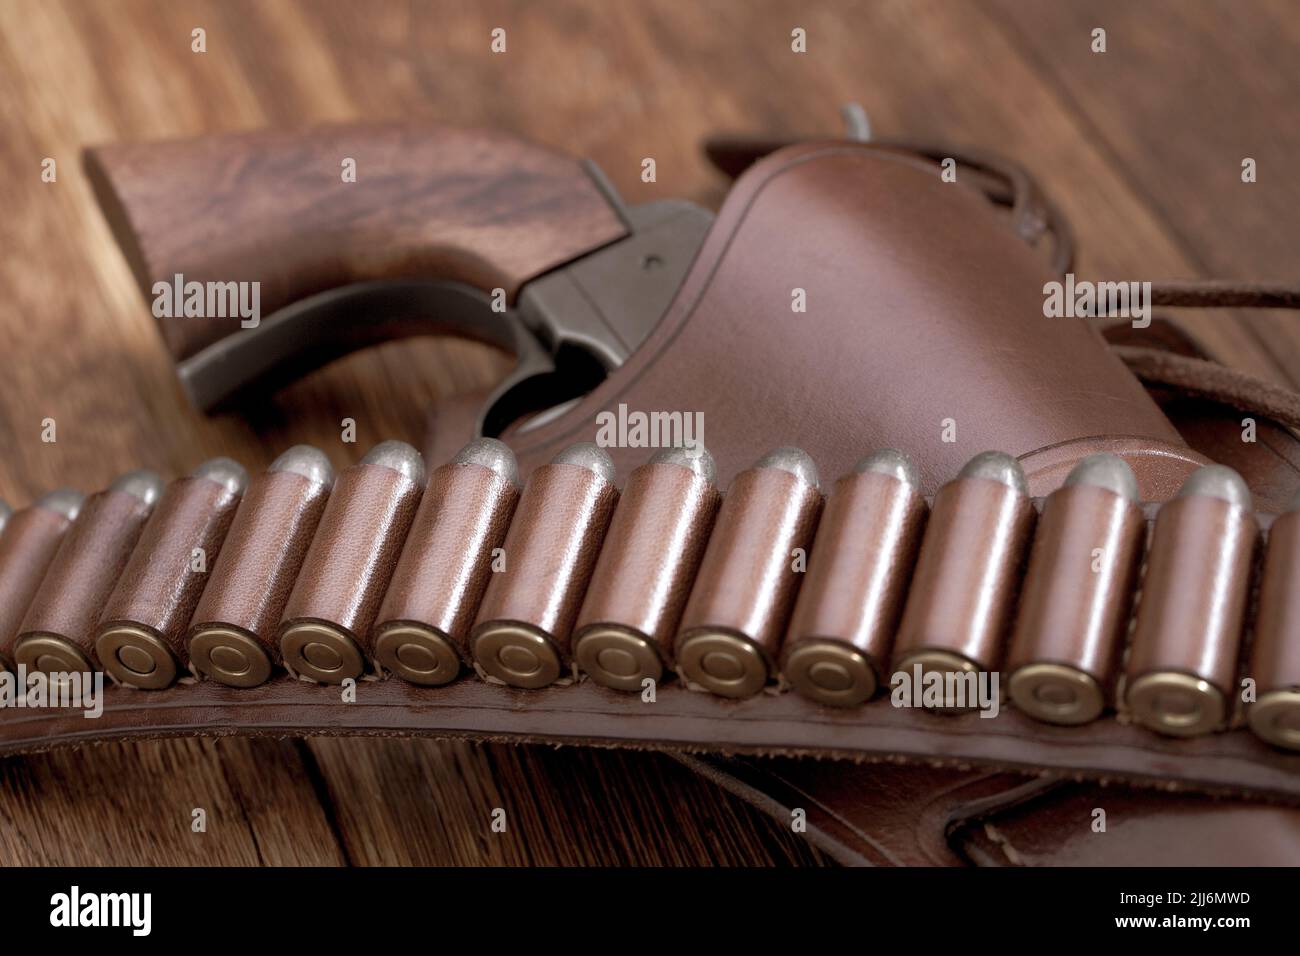 Old west leather gun belt with ammnunition and revolver in holster on wooden table Stock Photo